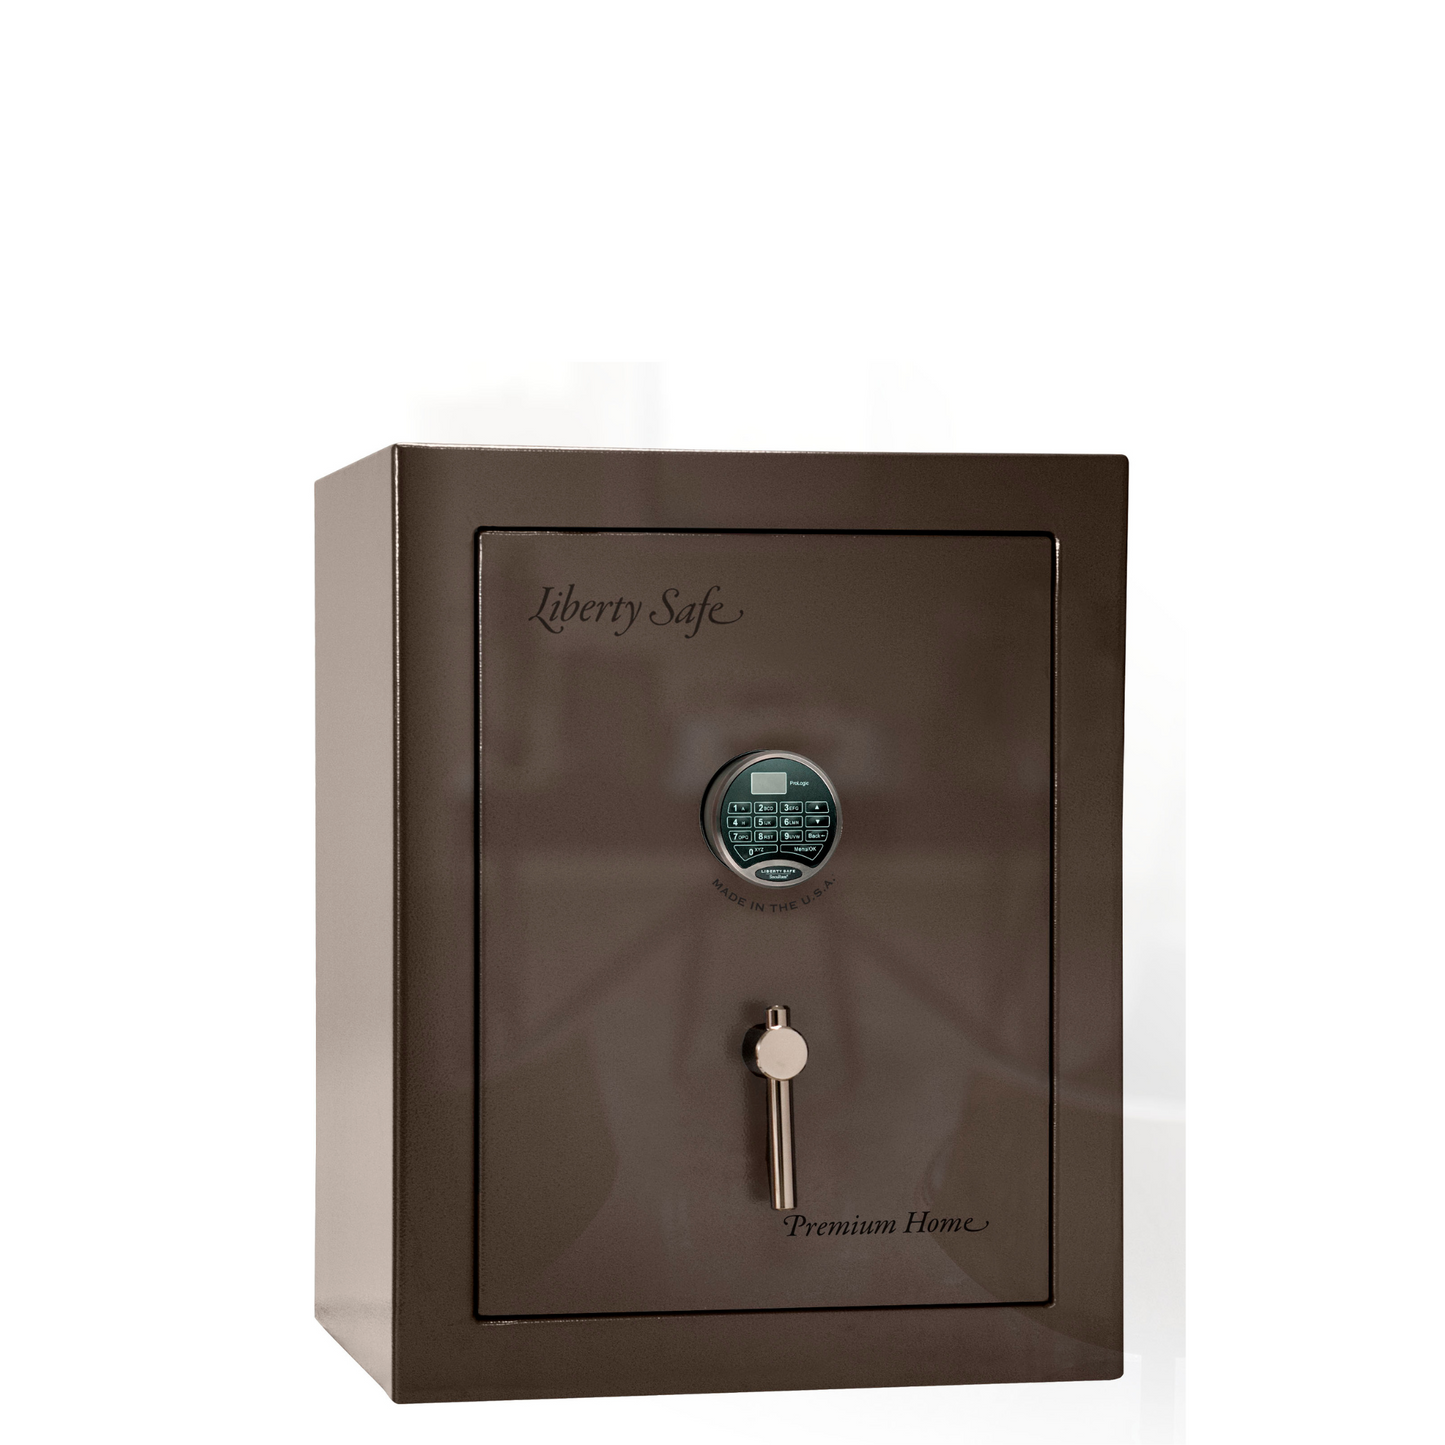 Premium Home Series | Level 7 Security | 2 Hour Fire Protection | 08 | Dimensions: 29.75"(H) x 24.5"(W) x 19"(D) | Bronze Gloss - Closed Door